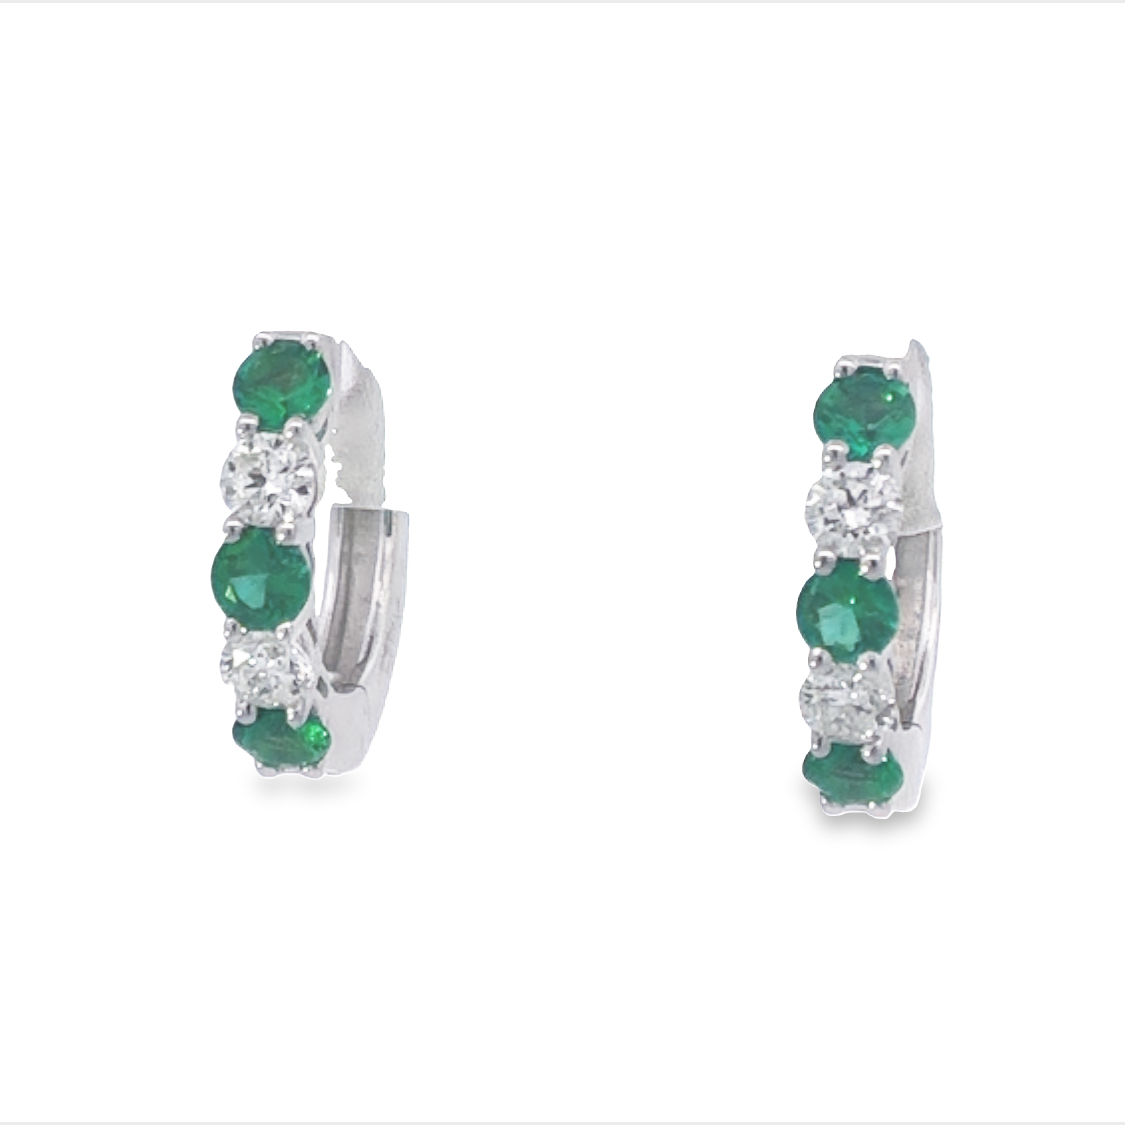 14K White Gold Hoop Earrings with 6 Round Emeralds 0.47 Tcw & 4 Round Diamonds 0.33 Tcw